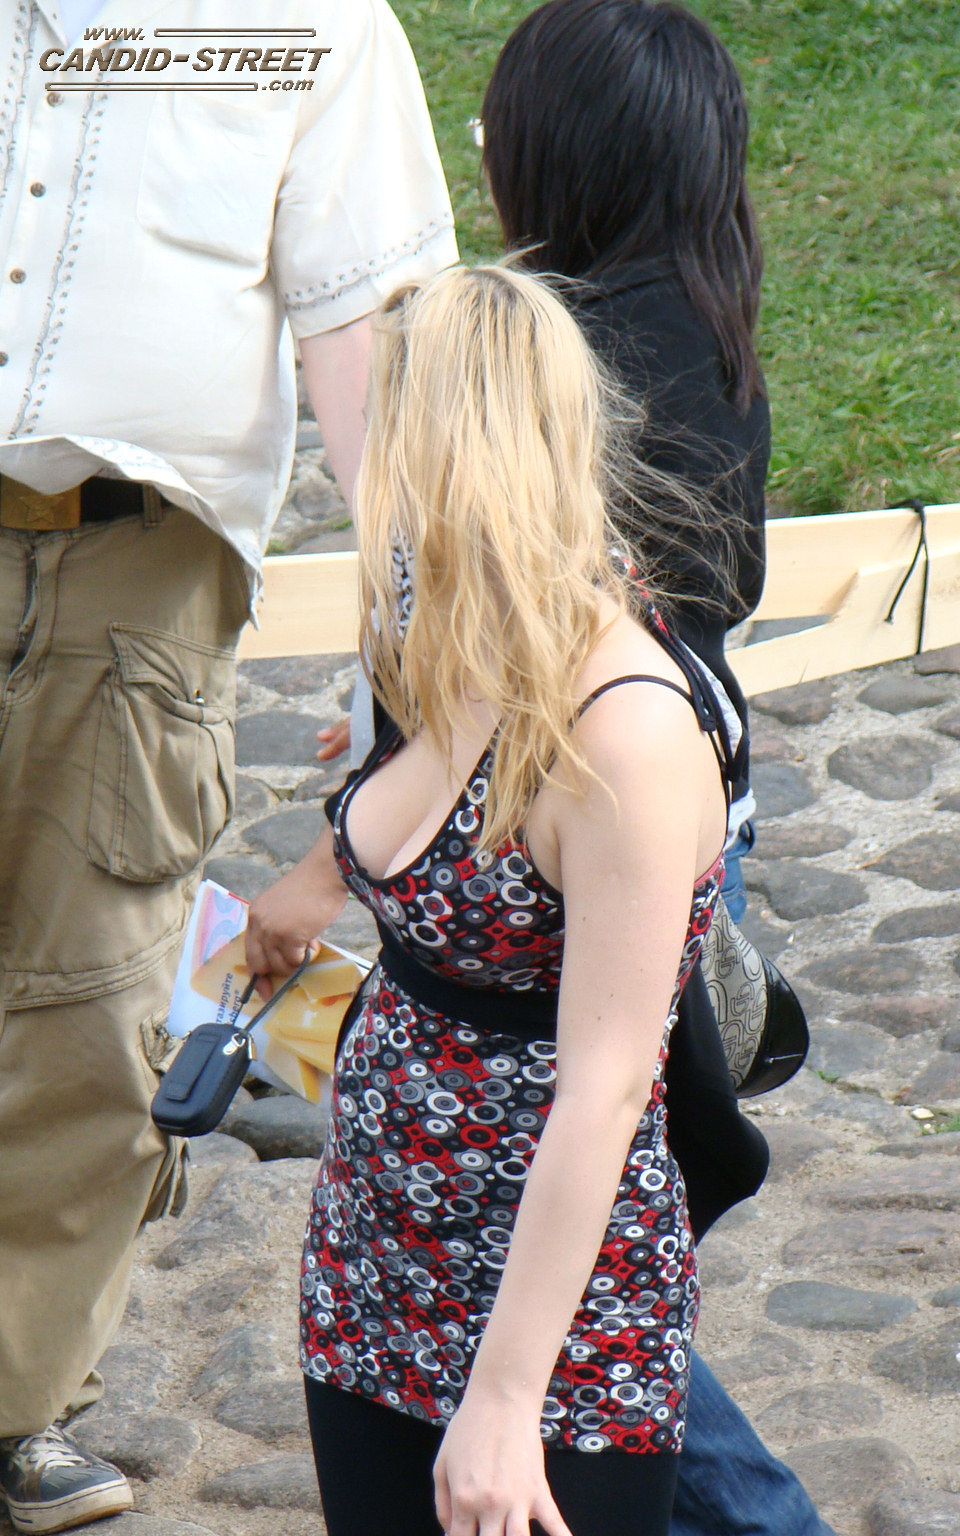 Busty girls candid shots - 13-dsc06598 from Candid Street